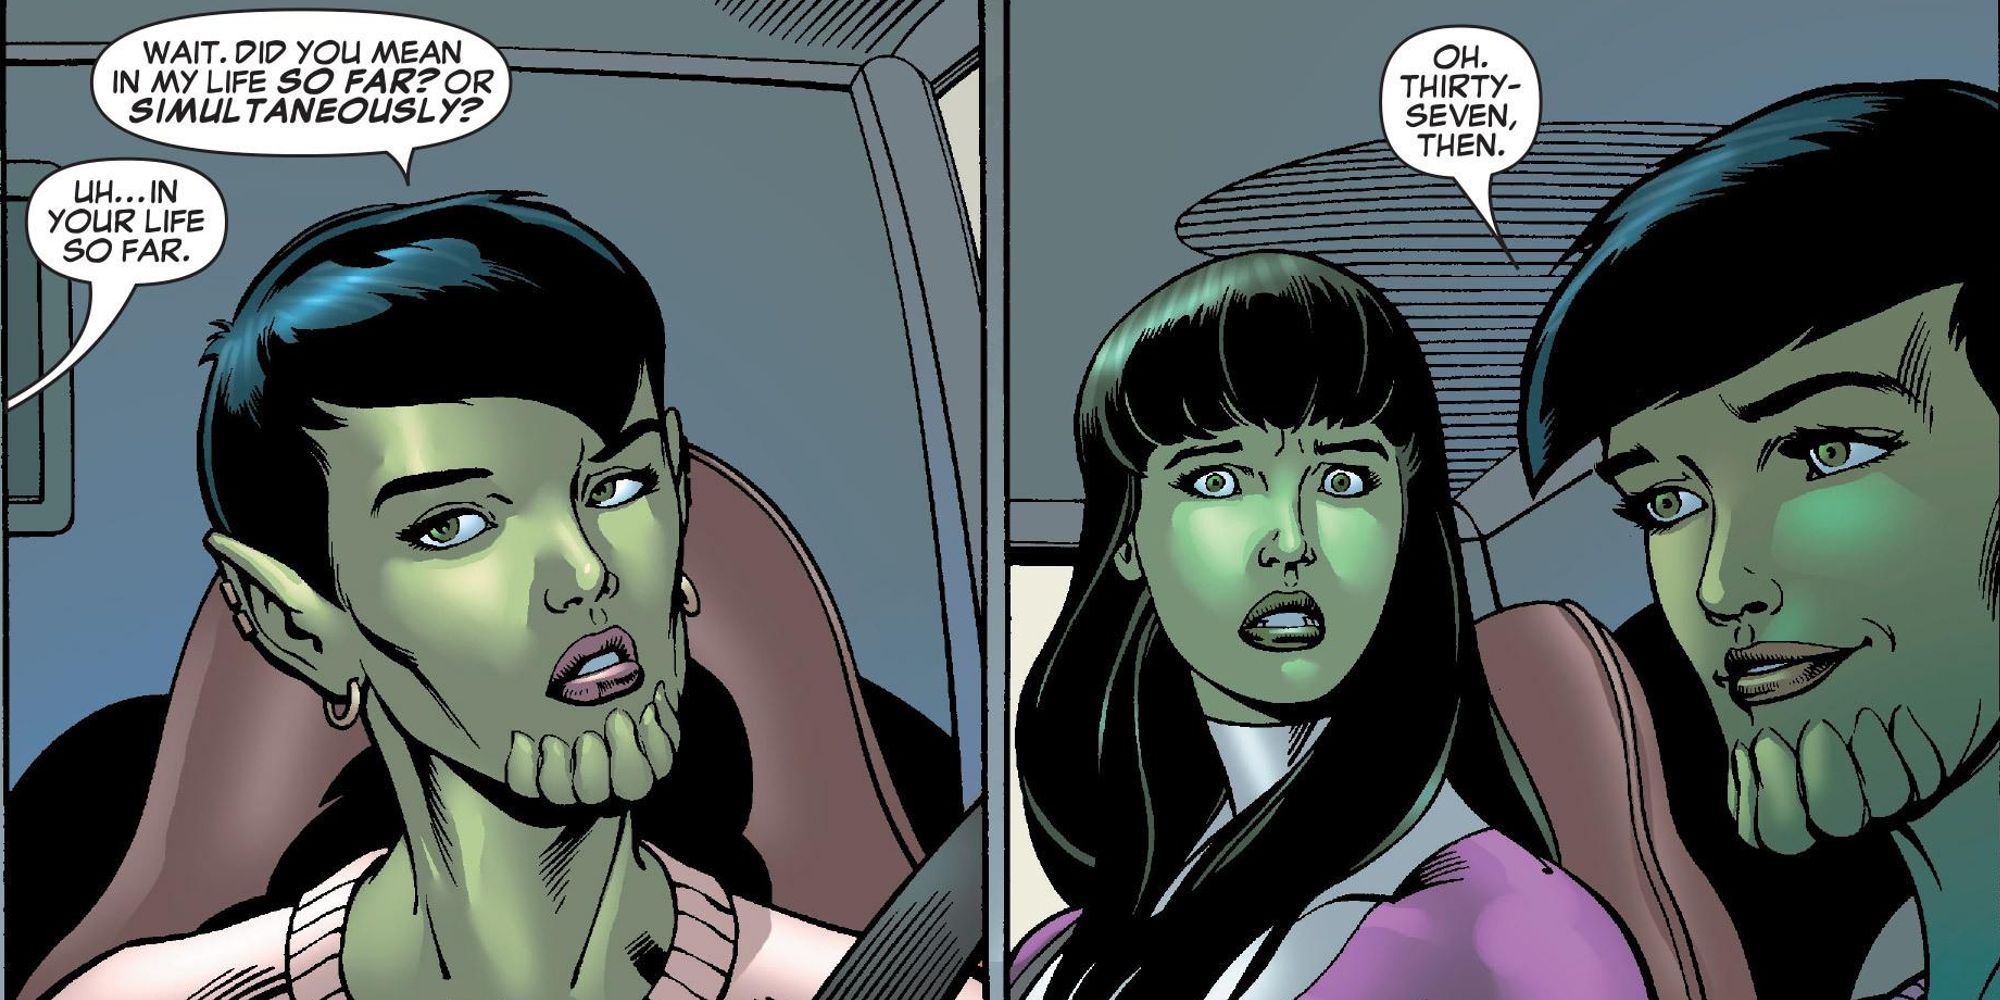 She-Hulk and Jazinda talking about their love lifes in She-Hulk #28